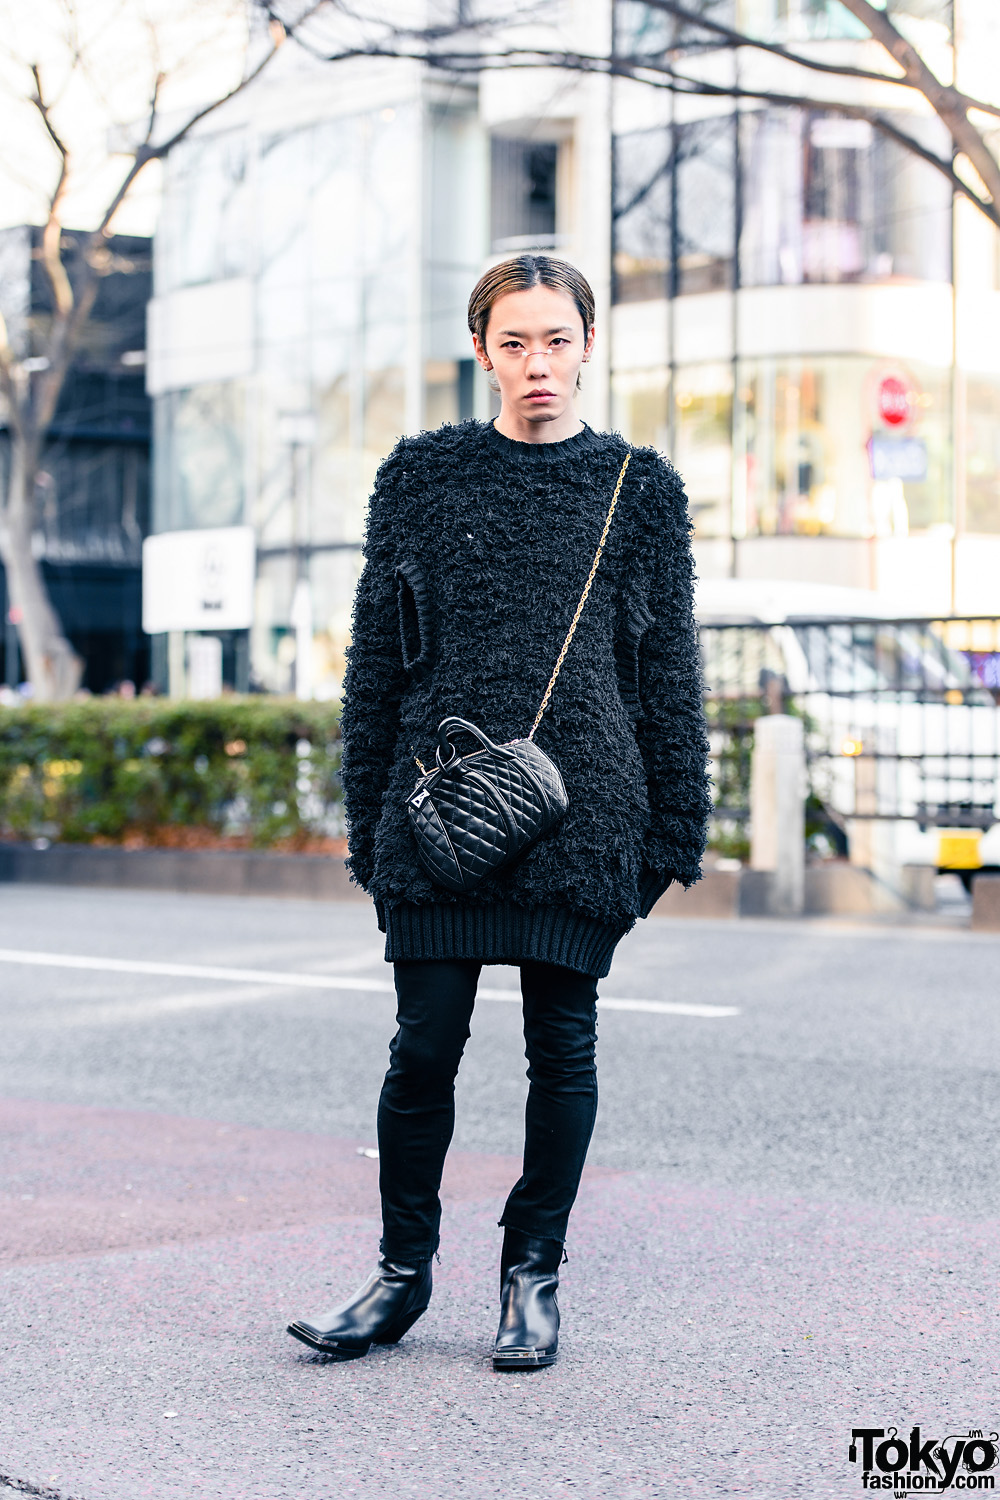 All Black Tokyo Style w/ Nose Jewelry, Cool Nail Art, John Lawrence Sullivan Mohair Sweater, Saint Laurent Paris, Anrealage & Acne Studios Square Toe Boots